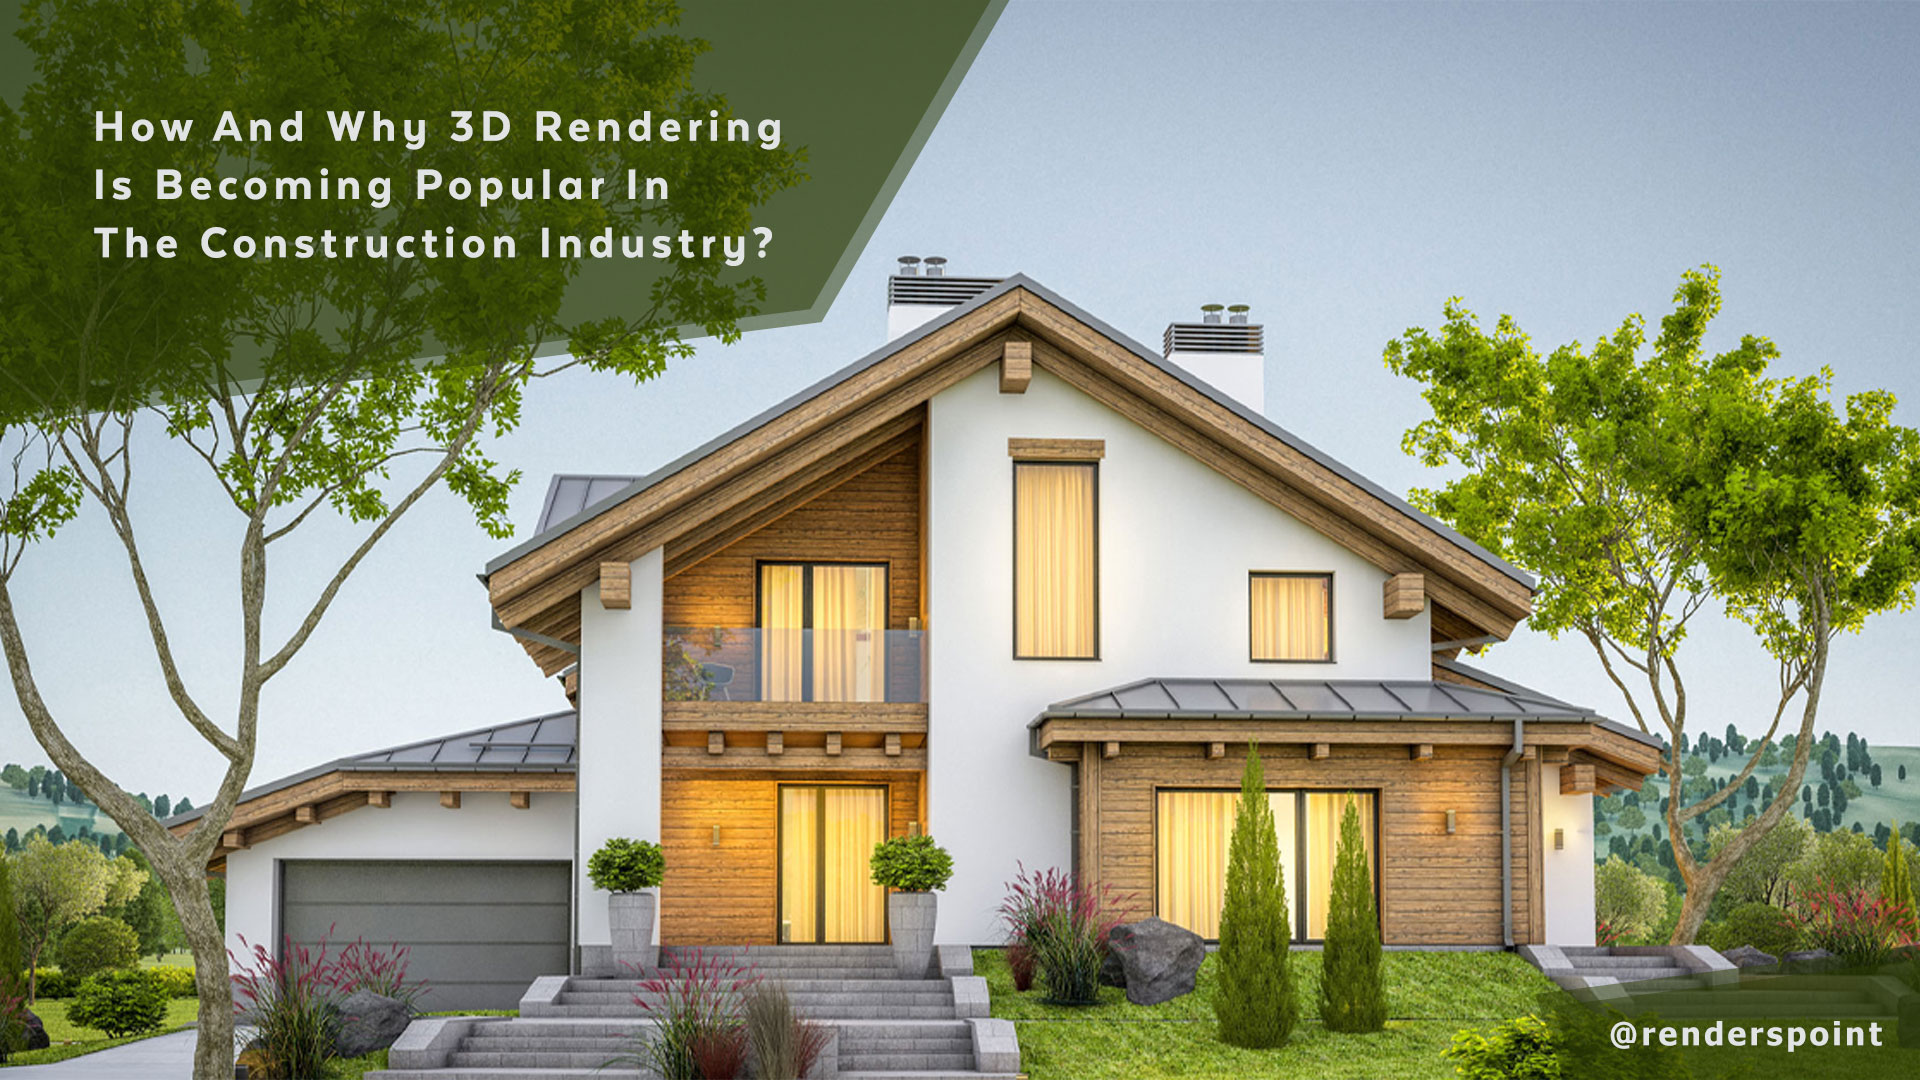 How and why 3D Rendering is becoming popular in the construction industry?